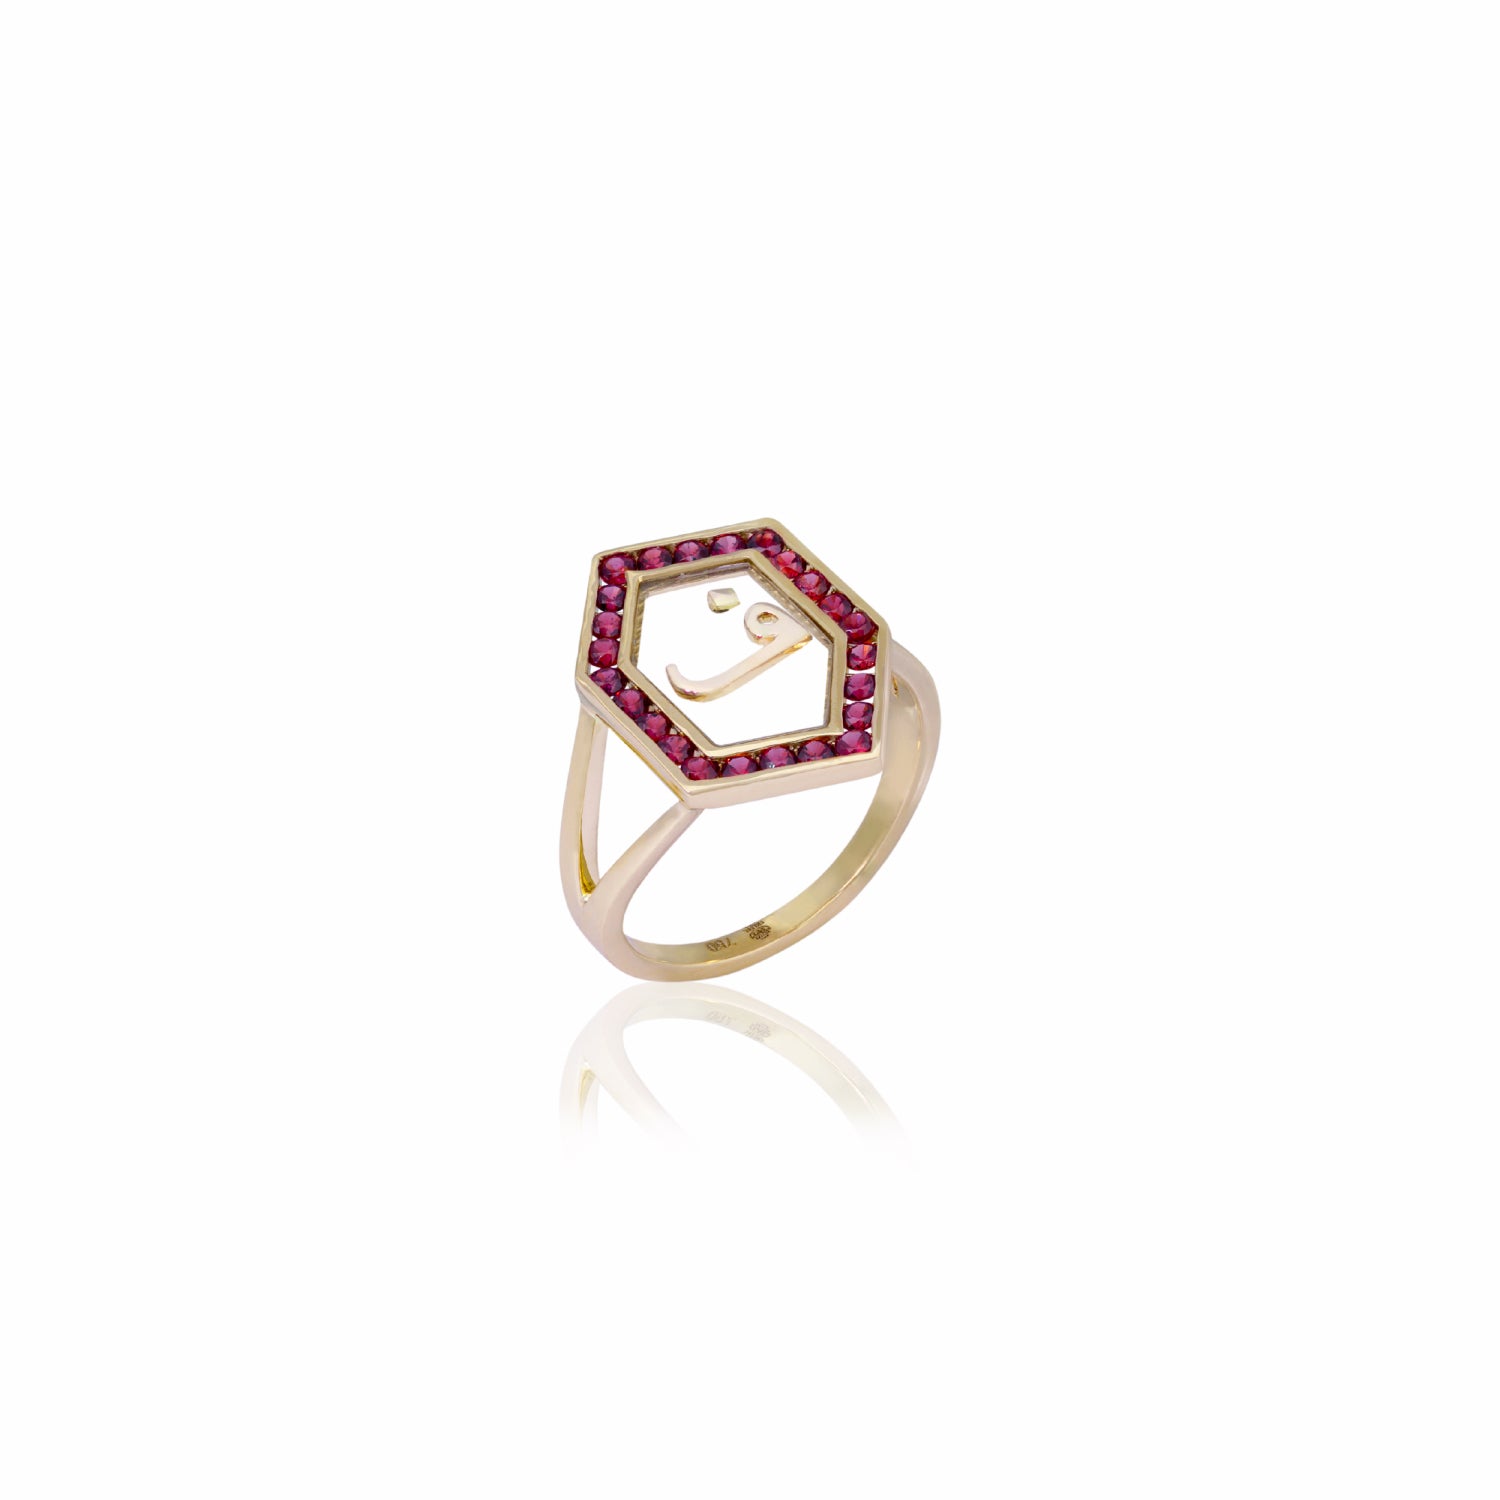 Qamoos 1.0 Letter ف Ruby Ring in Yellow Gold